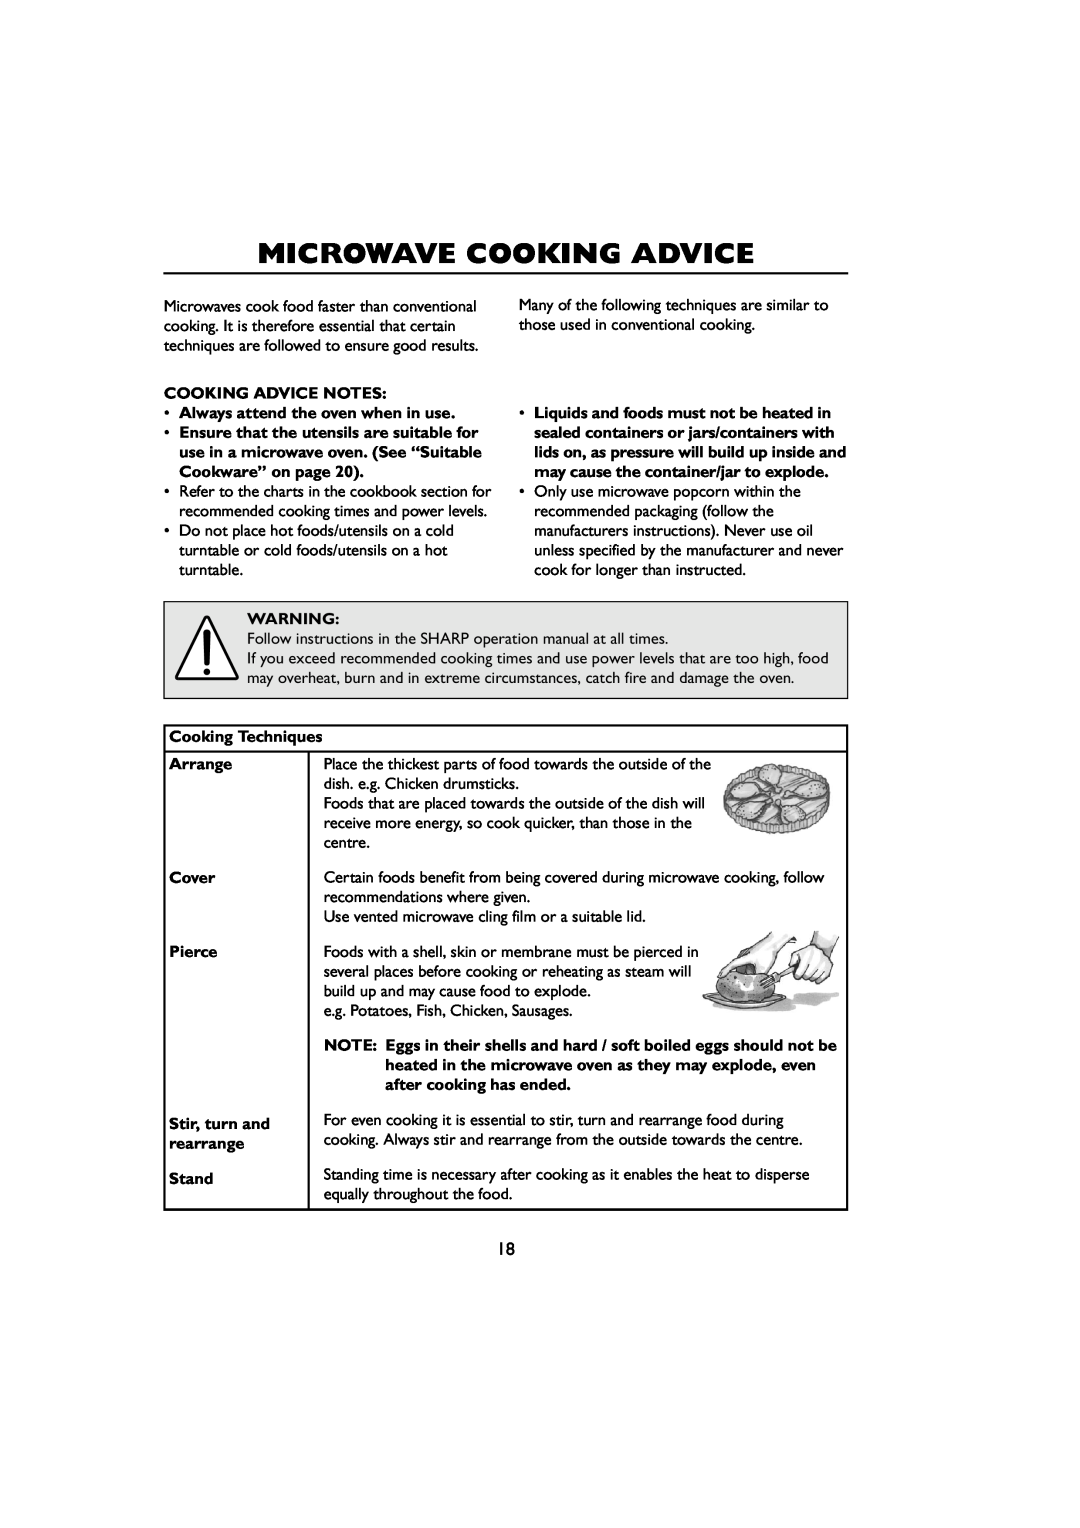 Sharp R-259 Microwave Cooking Advice, COOKING ADVICE NOTES Always attend the oven when in use, Cooking Techniques, Arrange 